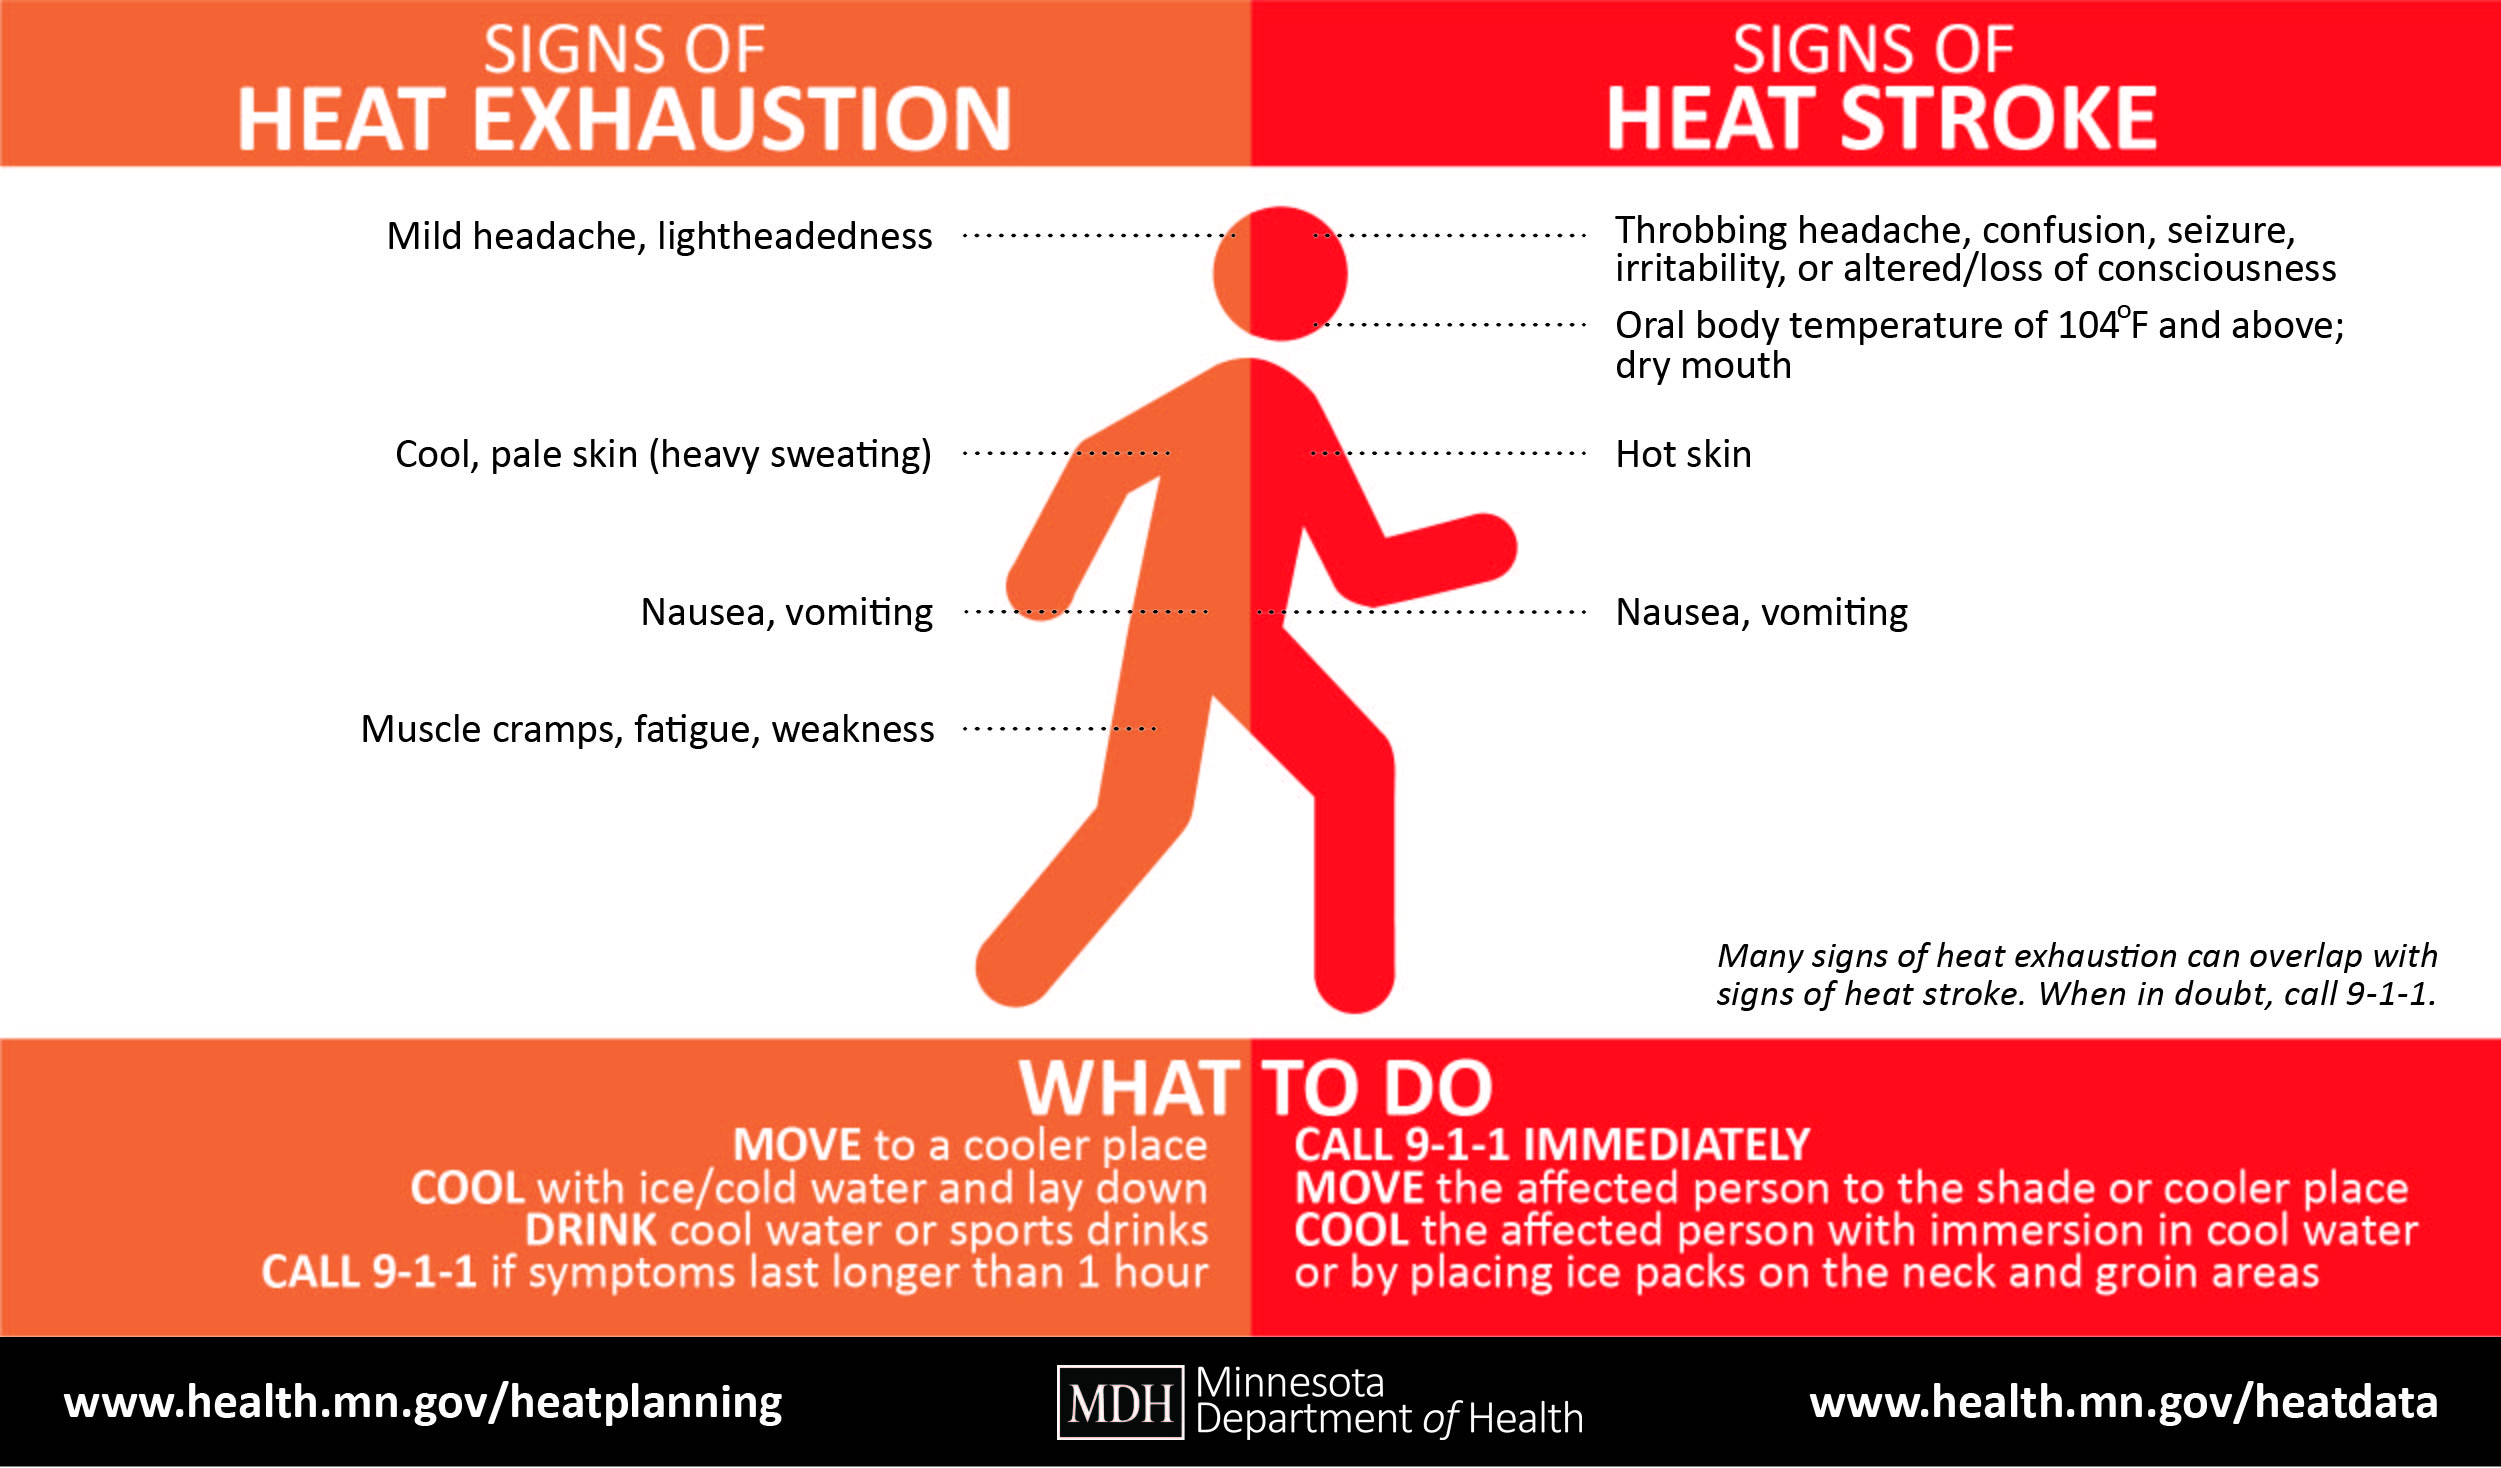 Protect your health during extreme heat